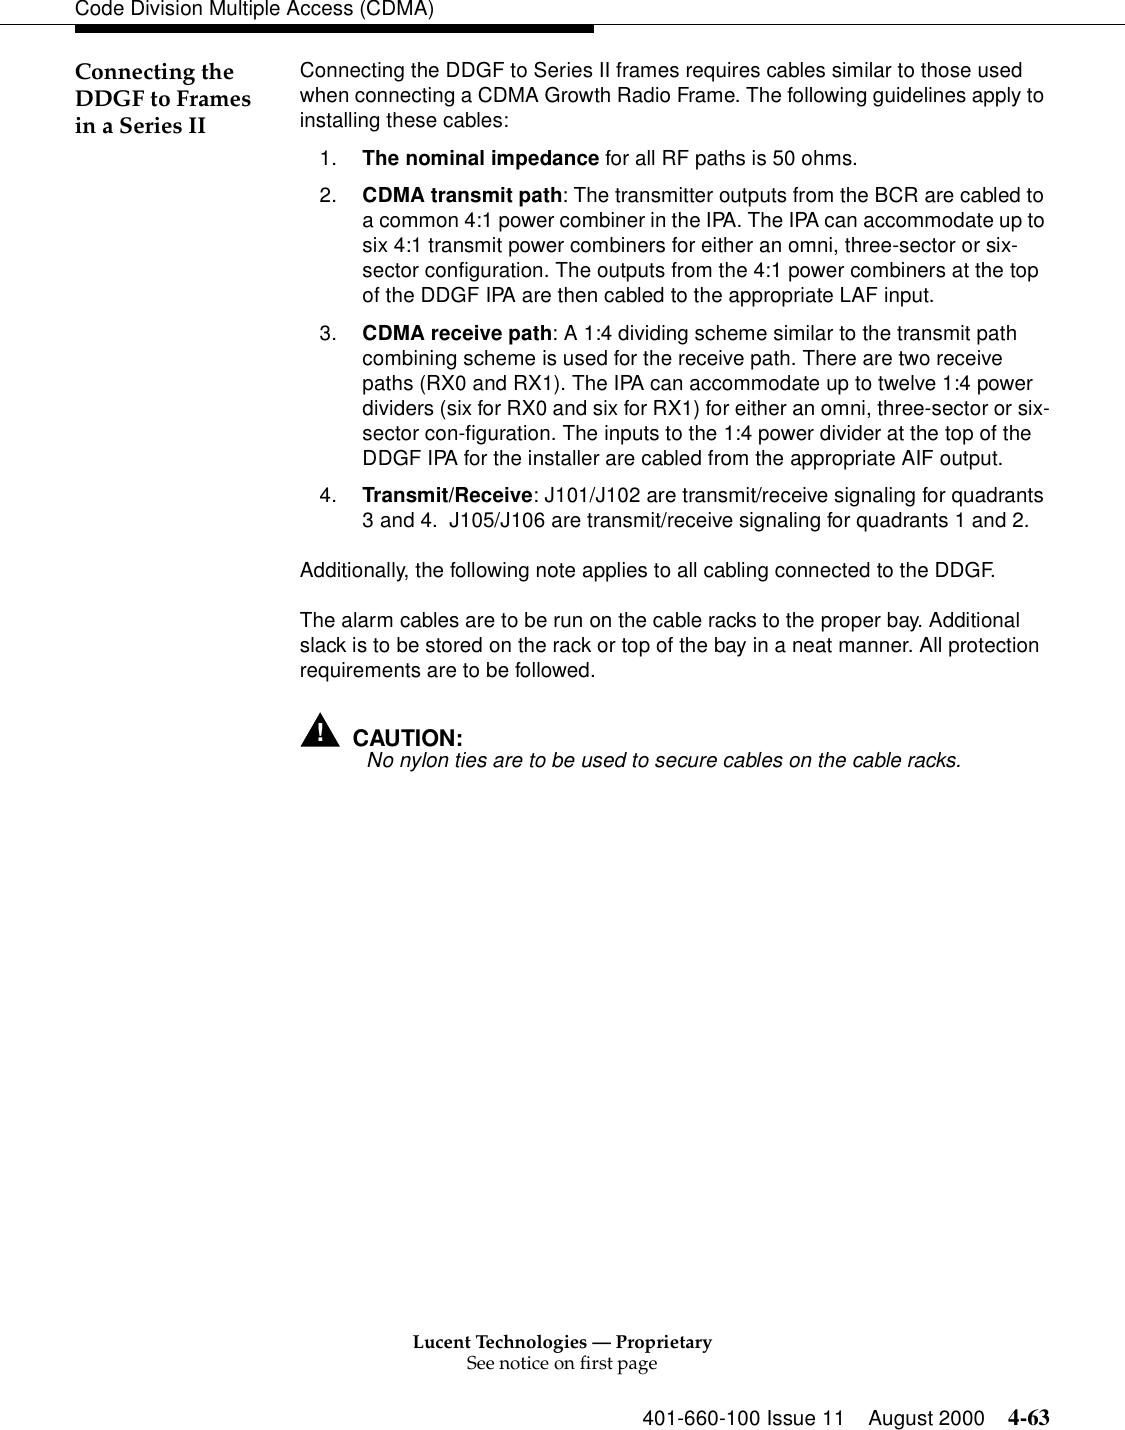 Lucent Technologies — ProprietarySee notice on first page401-660-100 Issue 11 August 2000 4-63Code Division Multiple Access (CDMA)Connecting the DDGF to Frames in a Series IIConnecting the DDGF to Series II frames requires cables similar to those used when connecting a CDMA Growth Radio Frame. The following guidelines apply to installing these cables:1. The nominal impedance for all RF paths is 50 ohms. 2. CDMA transmit path: The transmitter outputs from the BCR are cabled to a common 4:1 power combiner in the IPA. The IPA can accommodate up to six 4:1 transmit power combiners for either an omni, three-sector or six-sector configuration. The outputs from the 4:1 power combiners at the top of the DDGF IPA are then cabled to the appropriate LAF input.3. CDMA receive path: A 1:4 dividing scheme similar to the transmit path combining scheme is used for the receive path. There are two receive paths (RX0 and RX1). The IPA can accommodate up to twelve 1:4 power dividers (six for RX0 and six for RX1) for either an omni, three-sector or six-sector con-figuration. The inputs to the 1:4 power divider at the top of the DDGF IPA for the installer are cabled from the appropriate AIF output.4. Transmit/Receive: J101/J102 are transmit/receive signaling for quadrants 3 and 4.  J105/J106 are transmit/receive signaling for quadrants 1 and 2.Additionally, the following note applies to all cabling connected to the DDGF.The alarm cables are to be run on the cable racks to the proper bay. Additional slack is to be stored on the rack or top of the bay in a neat manner. All protection requirements are to be followed.!CAUTION:! No nylon ties are to be used to secure cables on the cable racks.